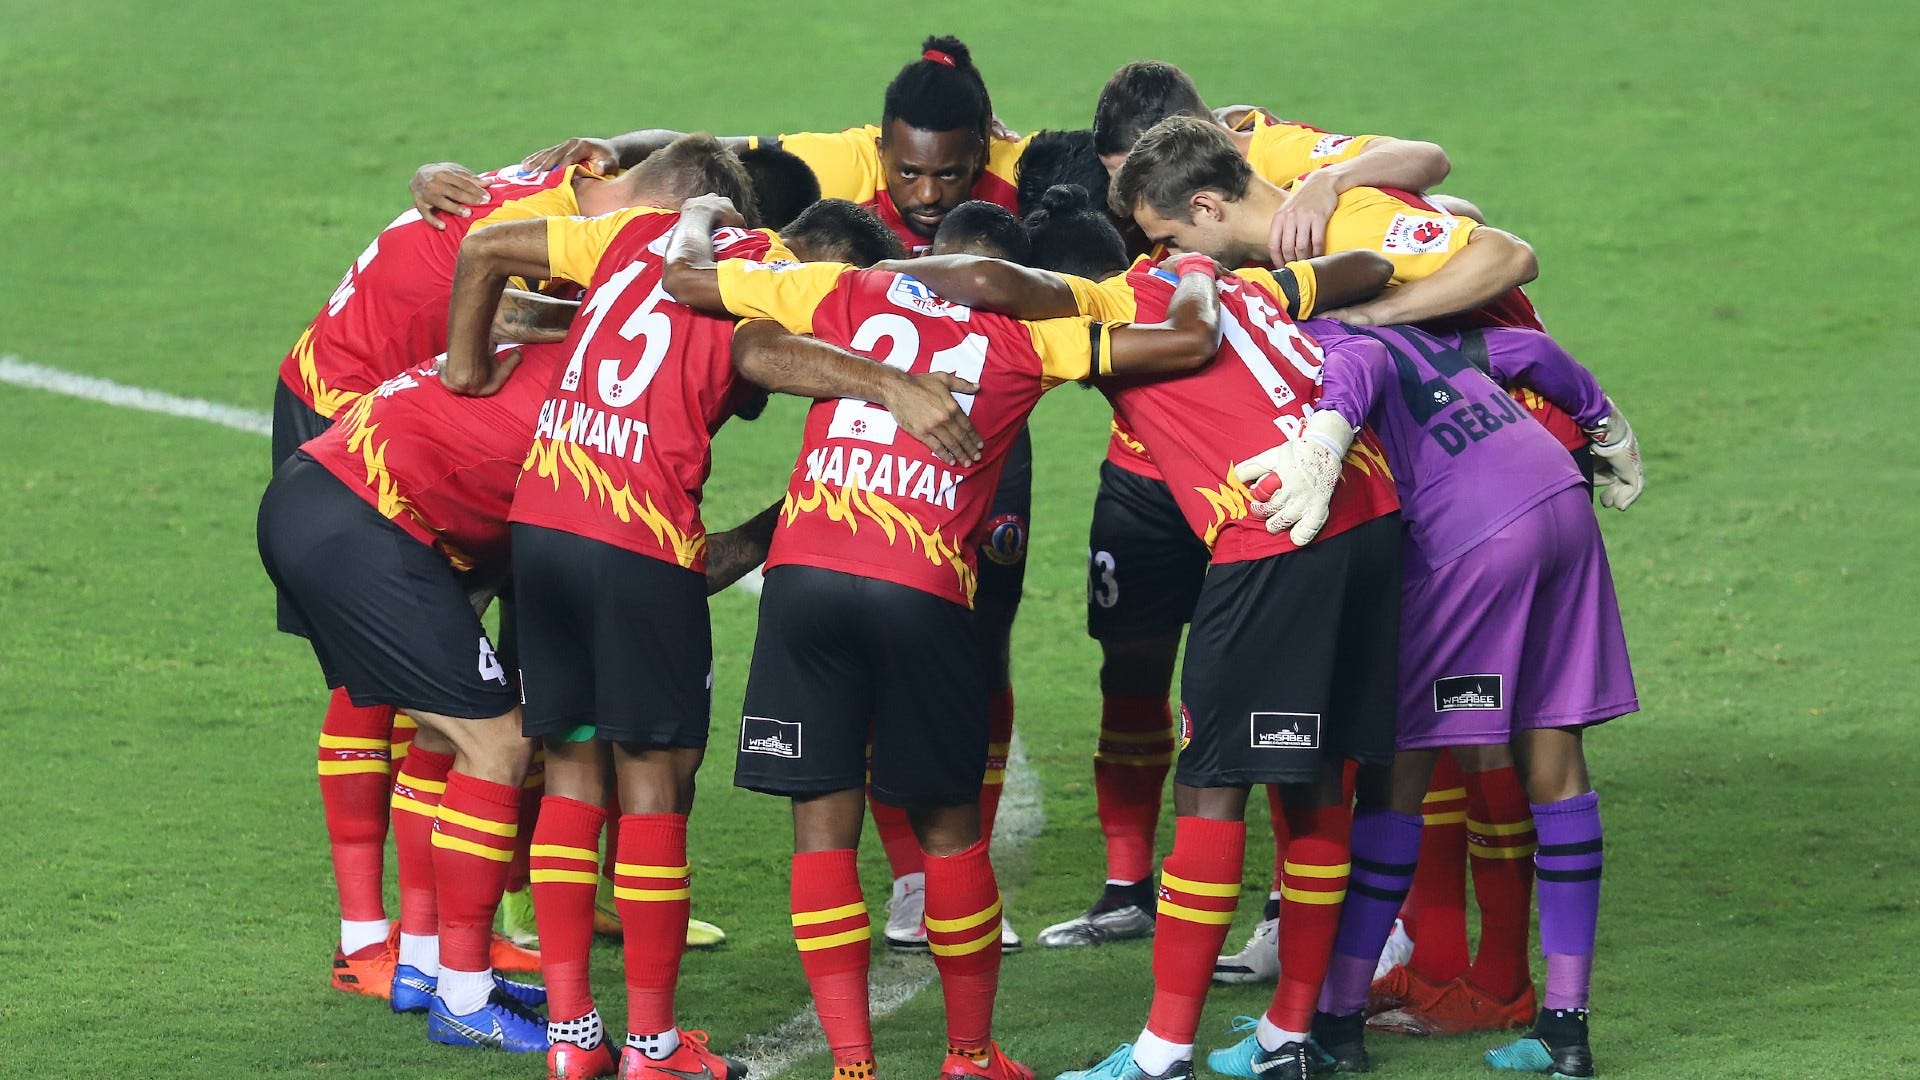 ISL 2020-21: Derby frenzy over, real test ahead for East Bengal now |  Goal.com India